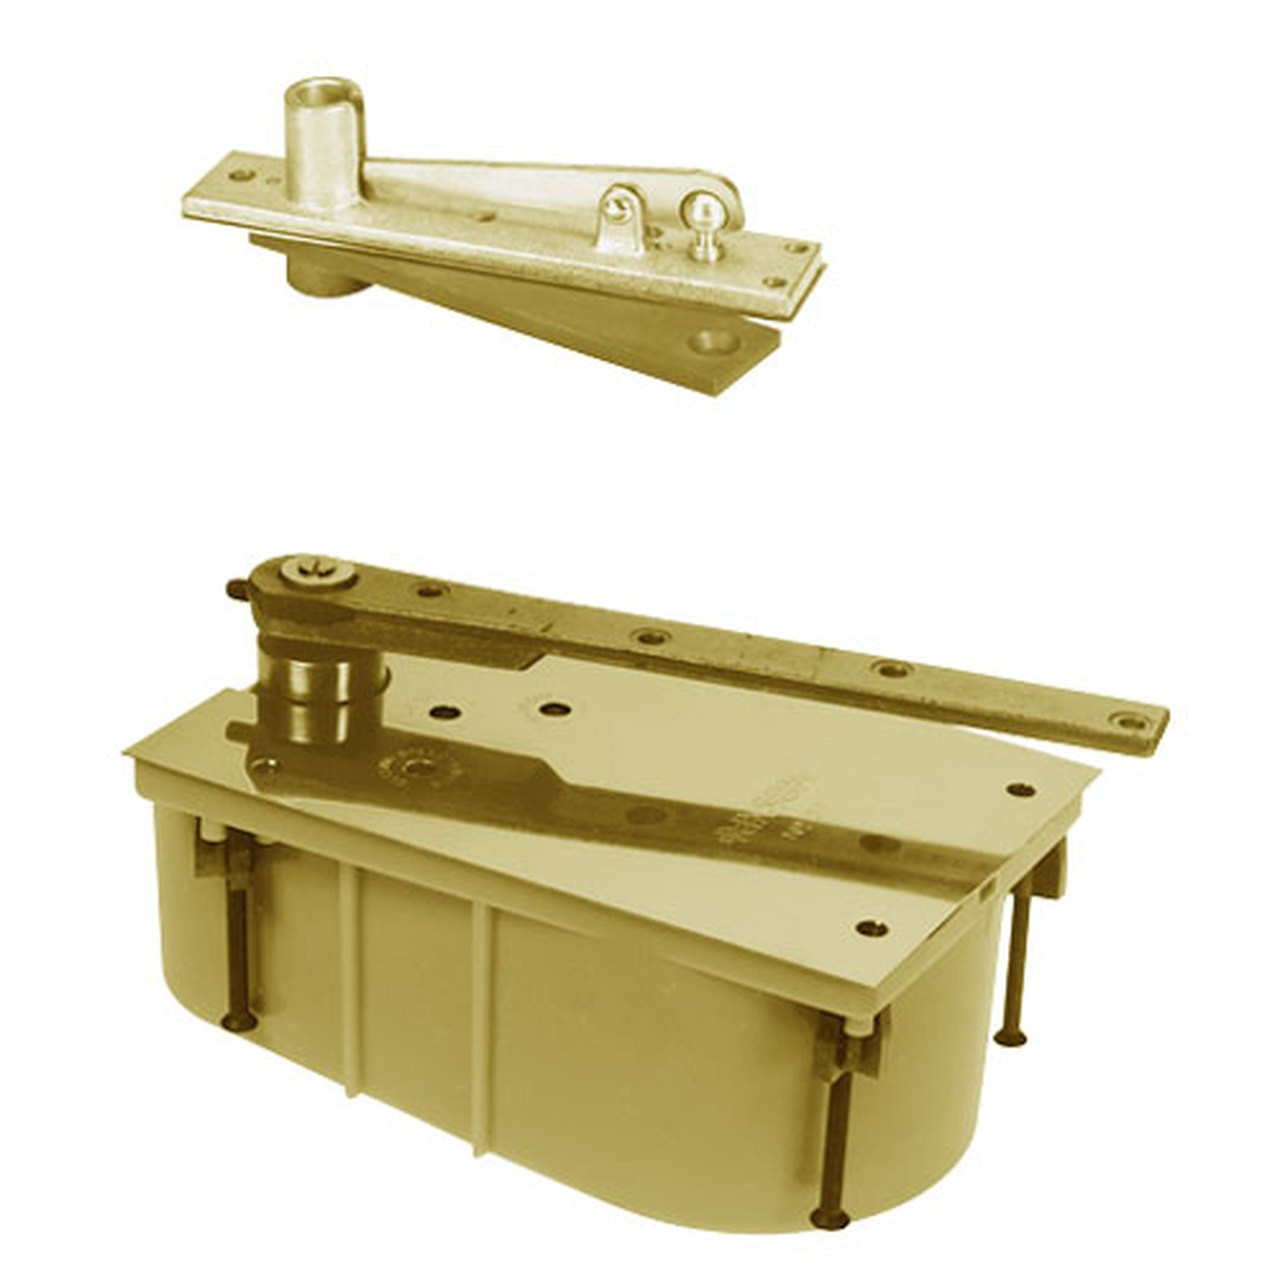 28-85N-554-LFP-LCC-LH-606 Rixson 28 Series Heavy Duty Single Acting Center Hung Floor Closer with Concealed Arm in Satin Brass Finish